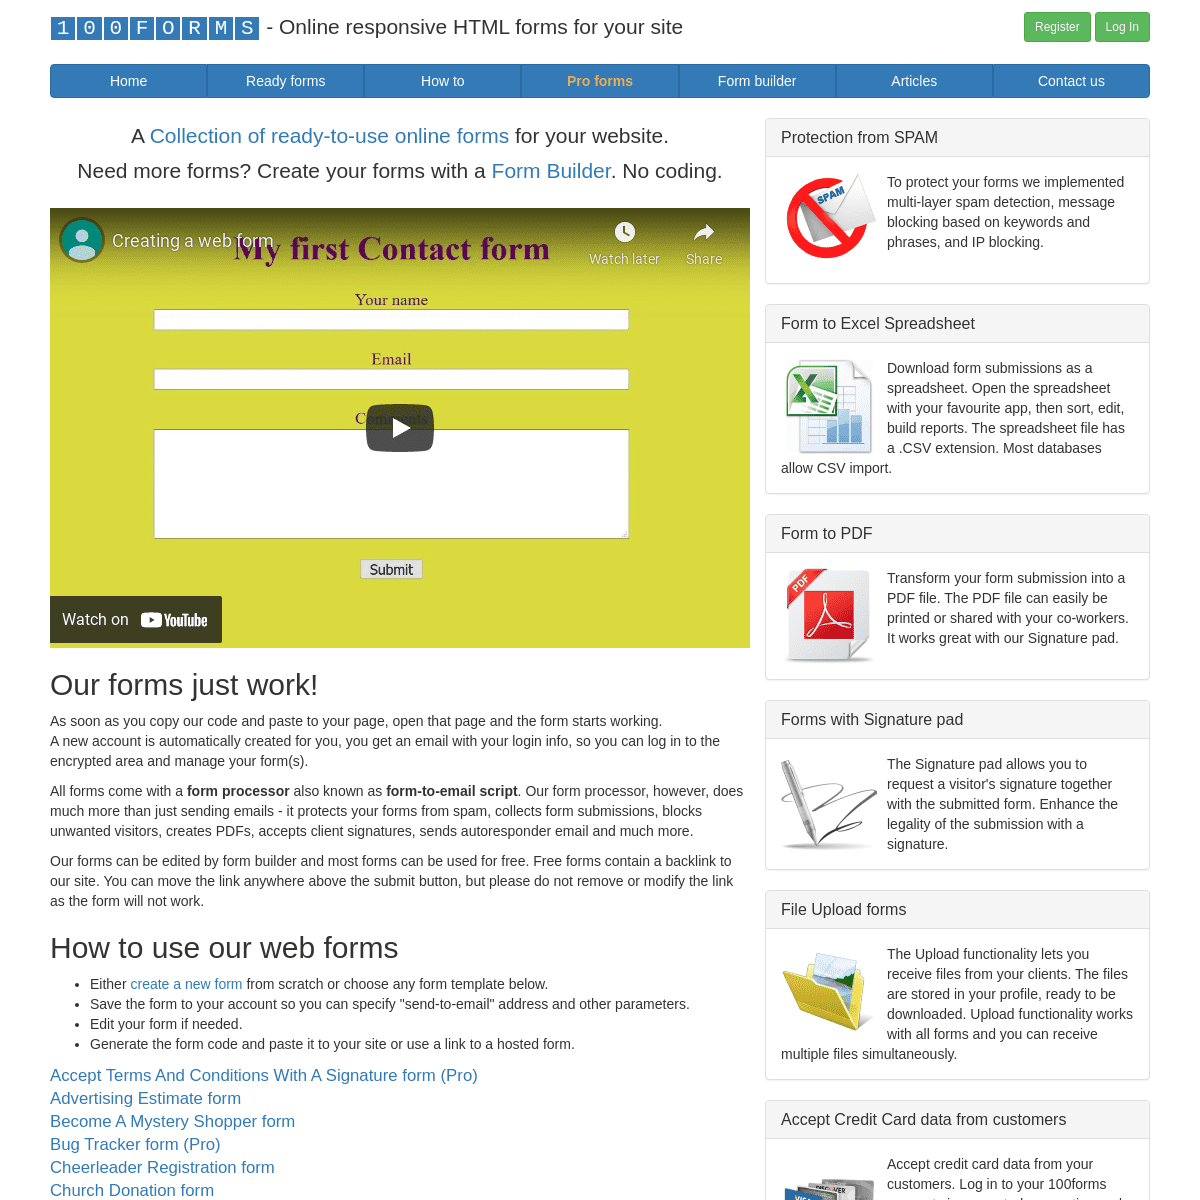 A complete backup of https://100forms.com